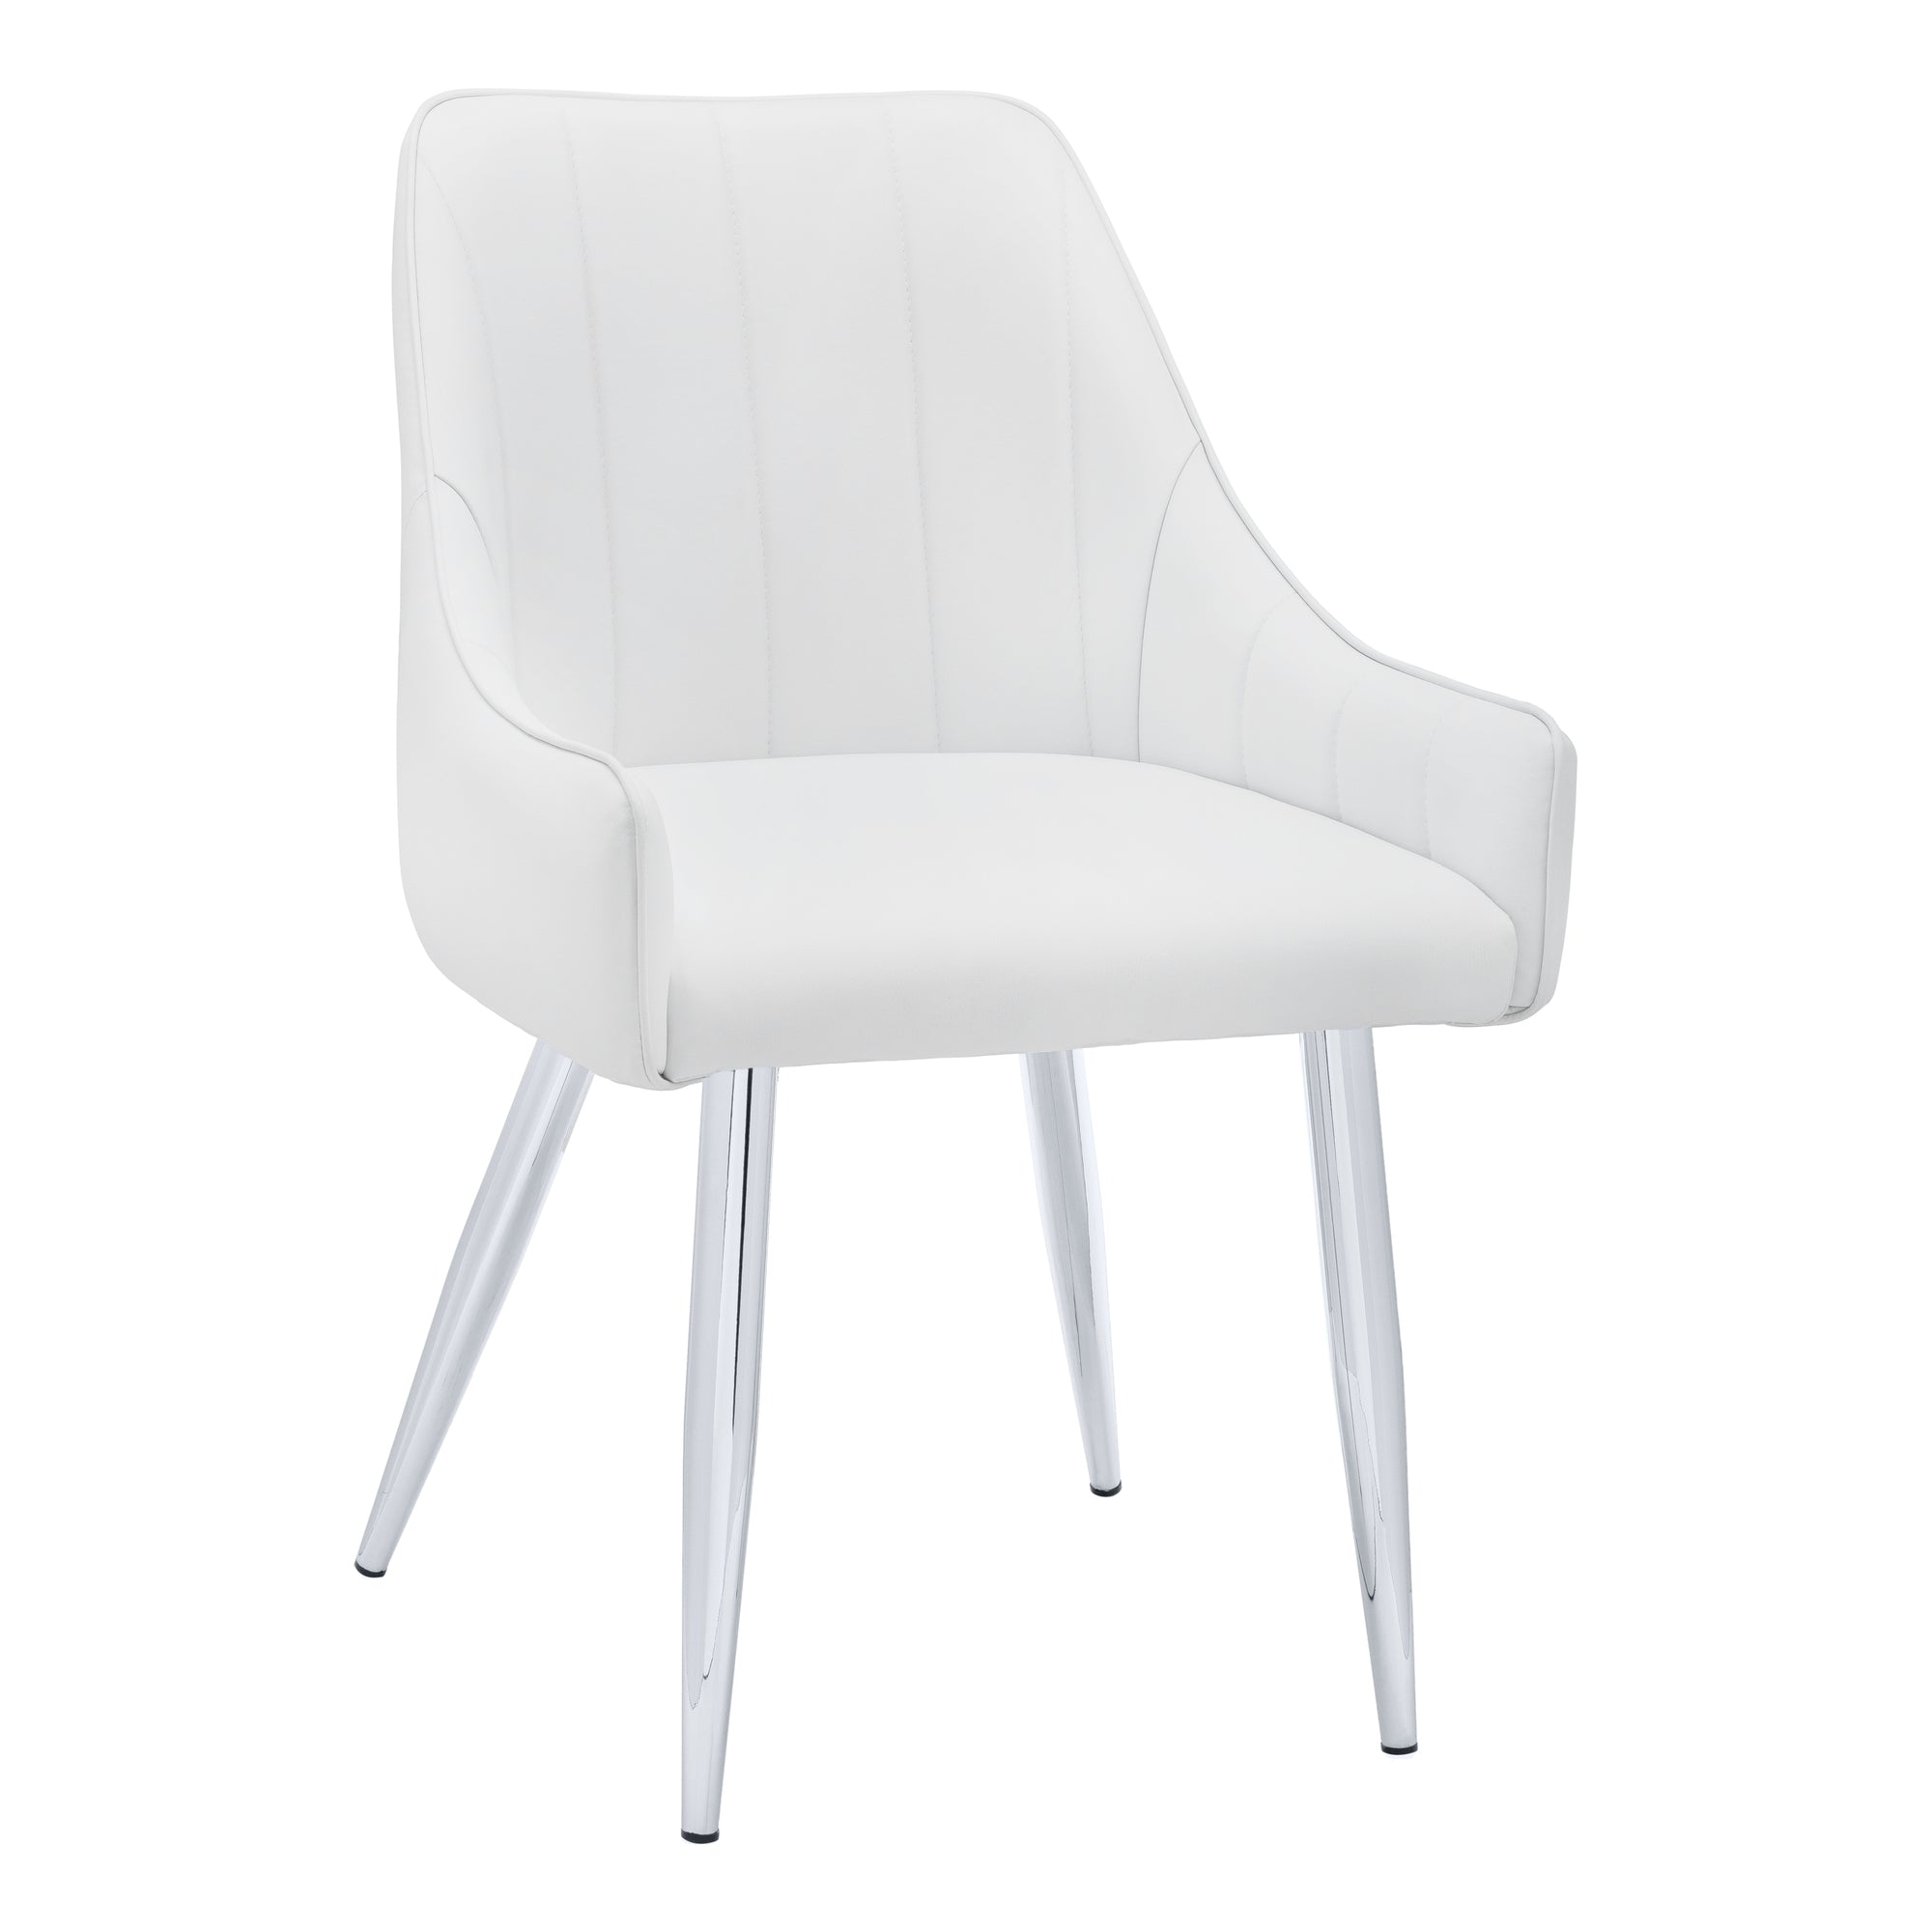 MN-781184    Dining Chair, Set Of 2, Side, Pu Leather-Look, Upholstered, Metal Legs, Kitchen, Dining Room, Leather Look, Metal Legs, White, Chrome, Contemporary, Modern